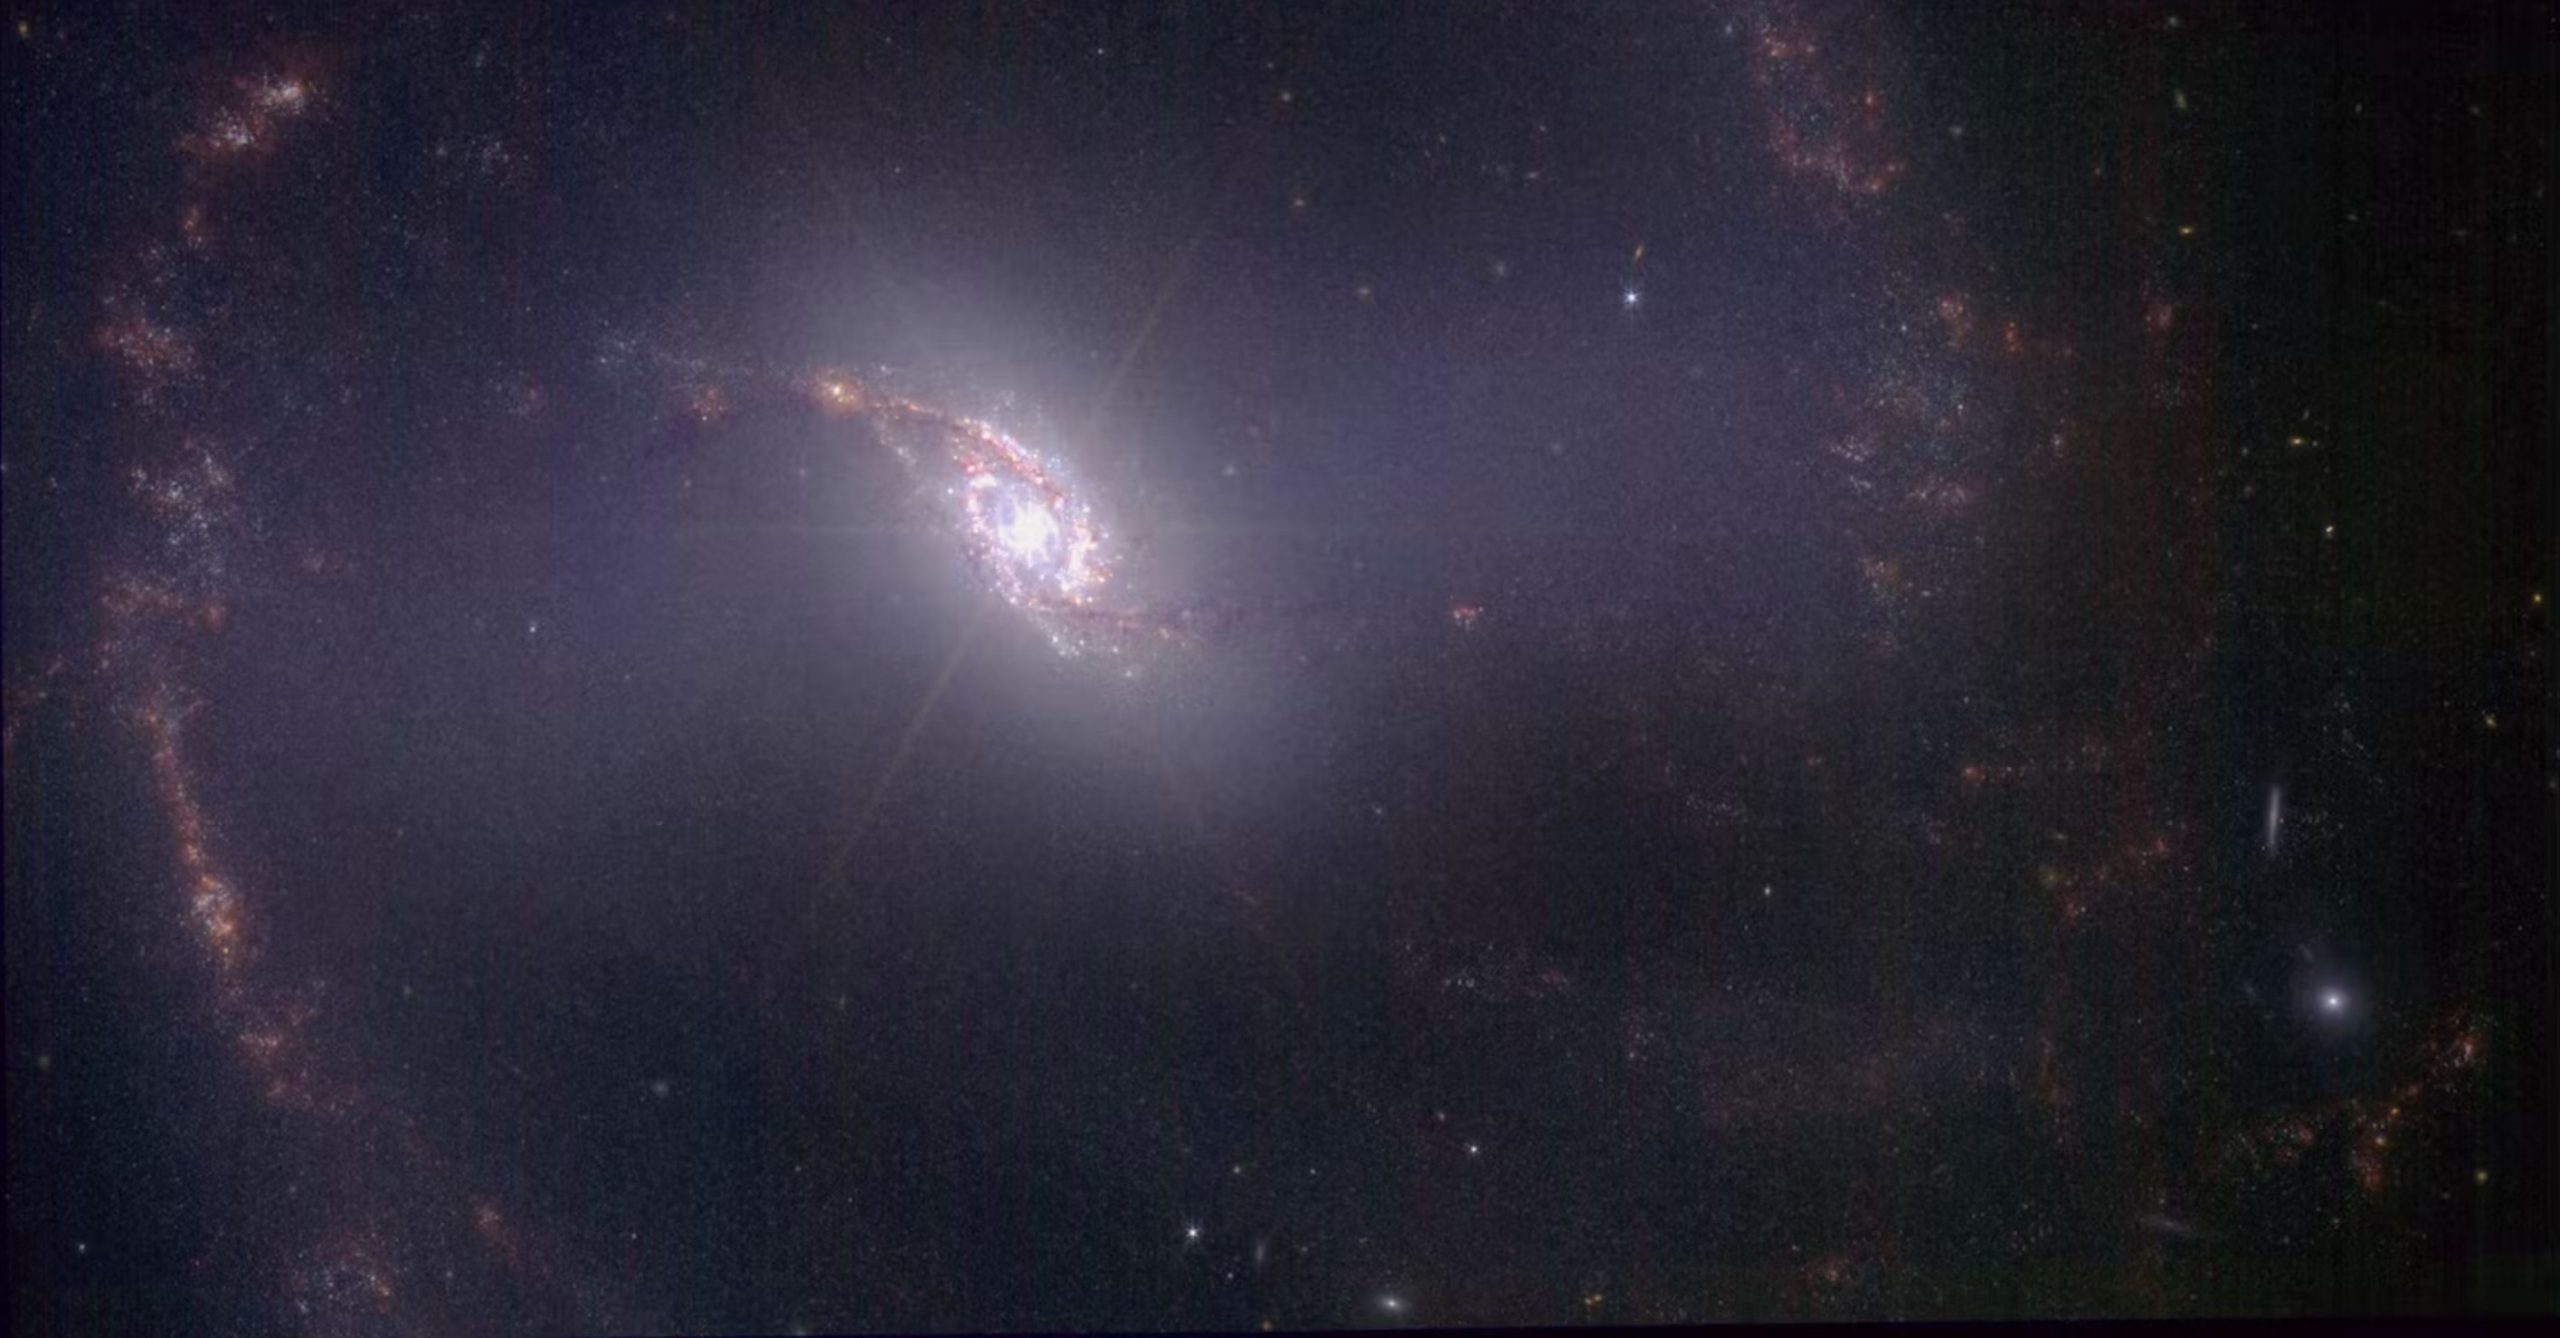 A photograph of NGC 1365 by the James Webb Space Telescope. Image Credit: NASA, ESA, CSA, STScI. Processed by: u/SpaceGuy44.